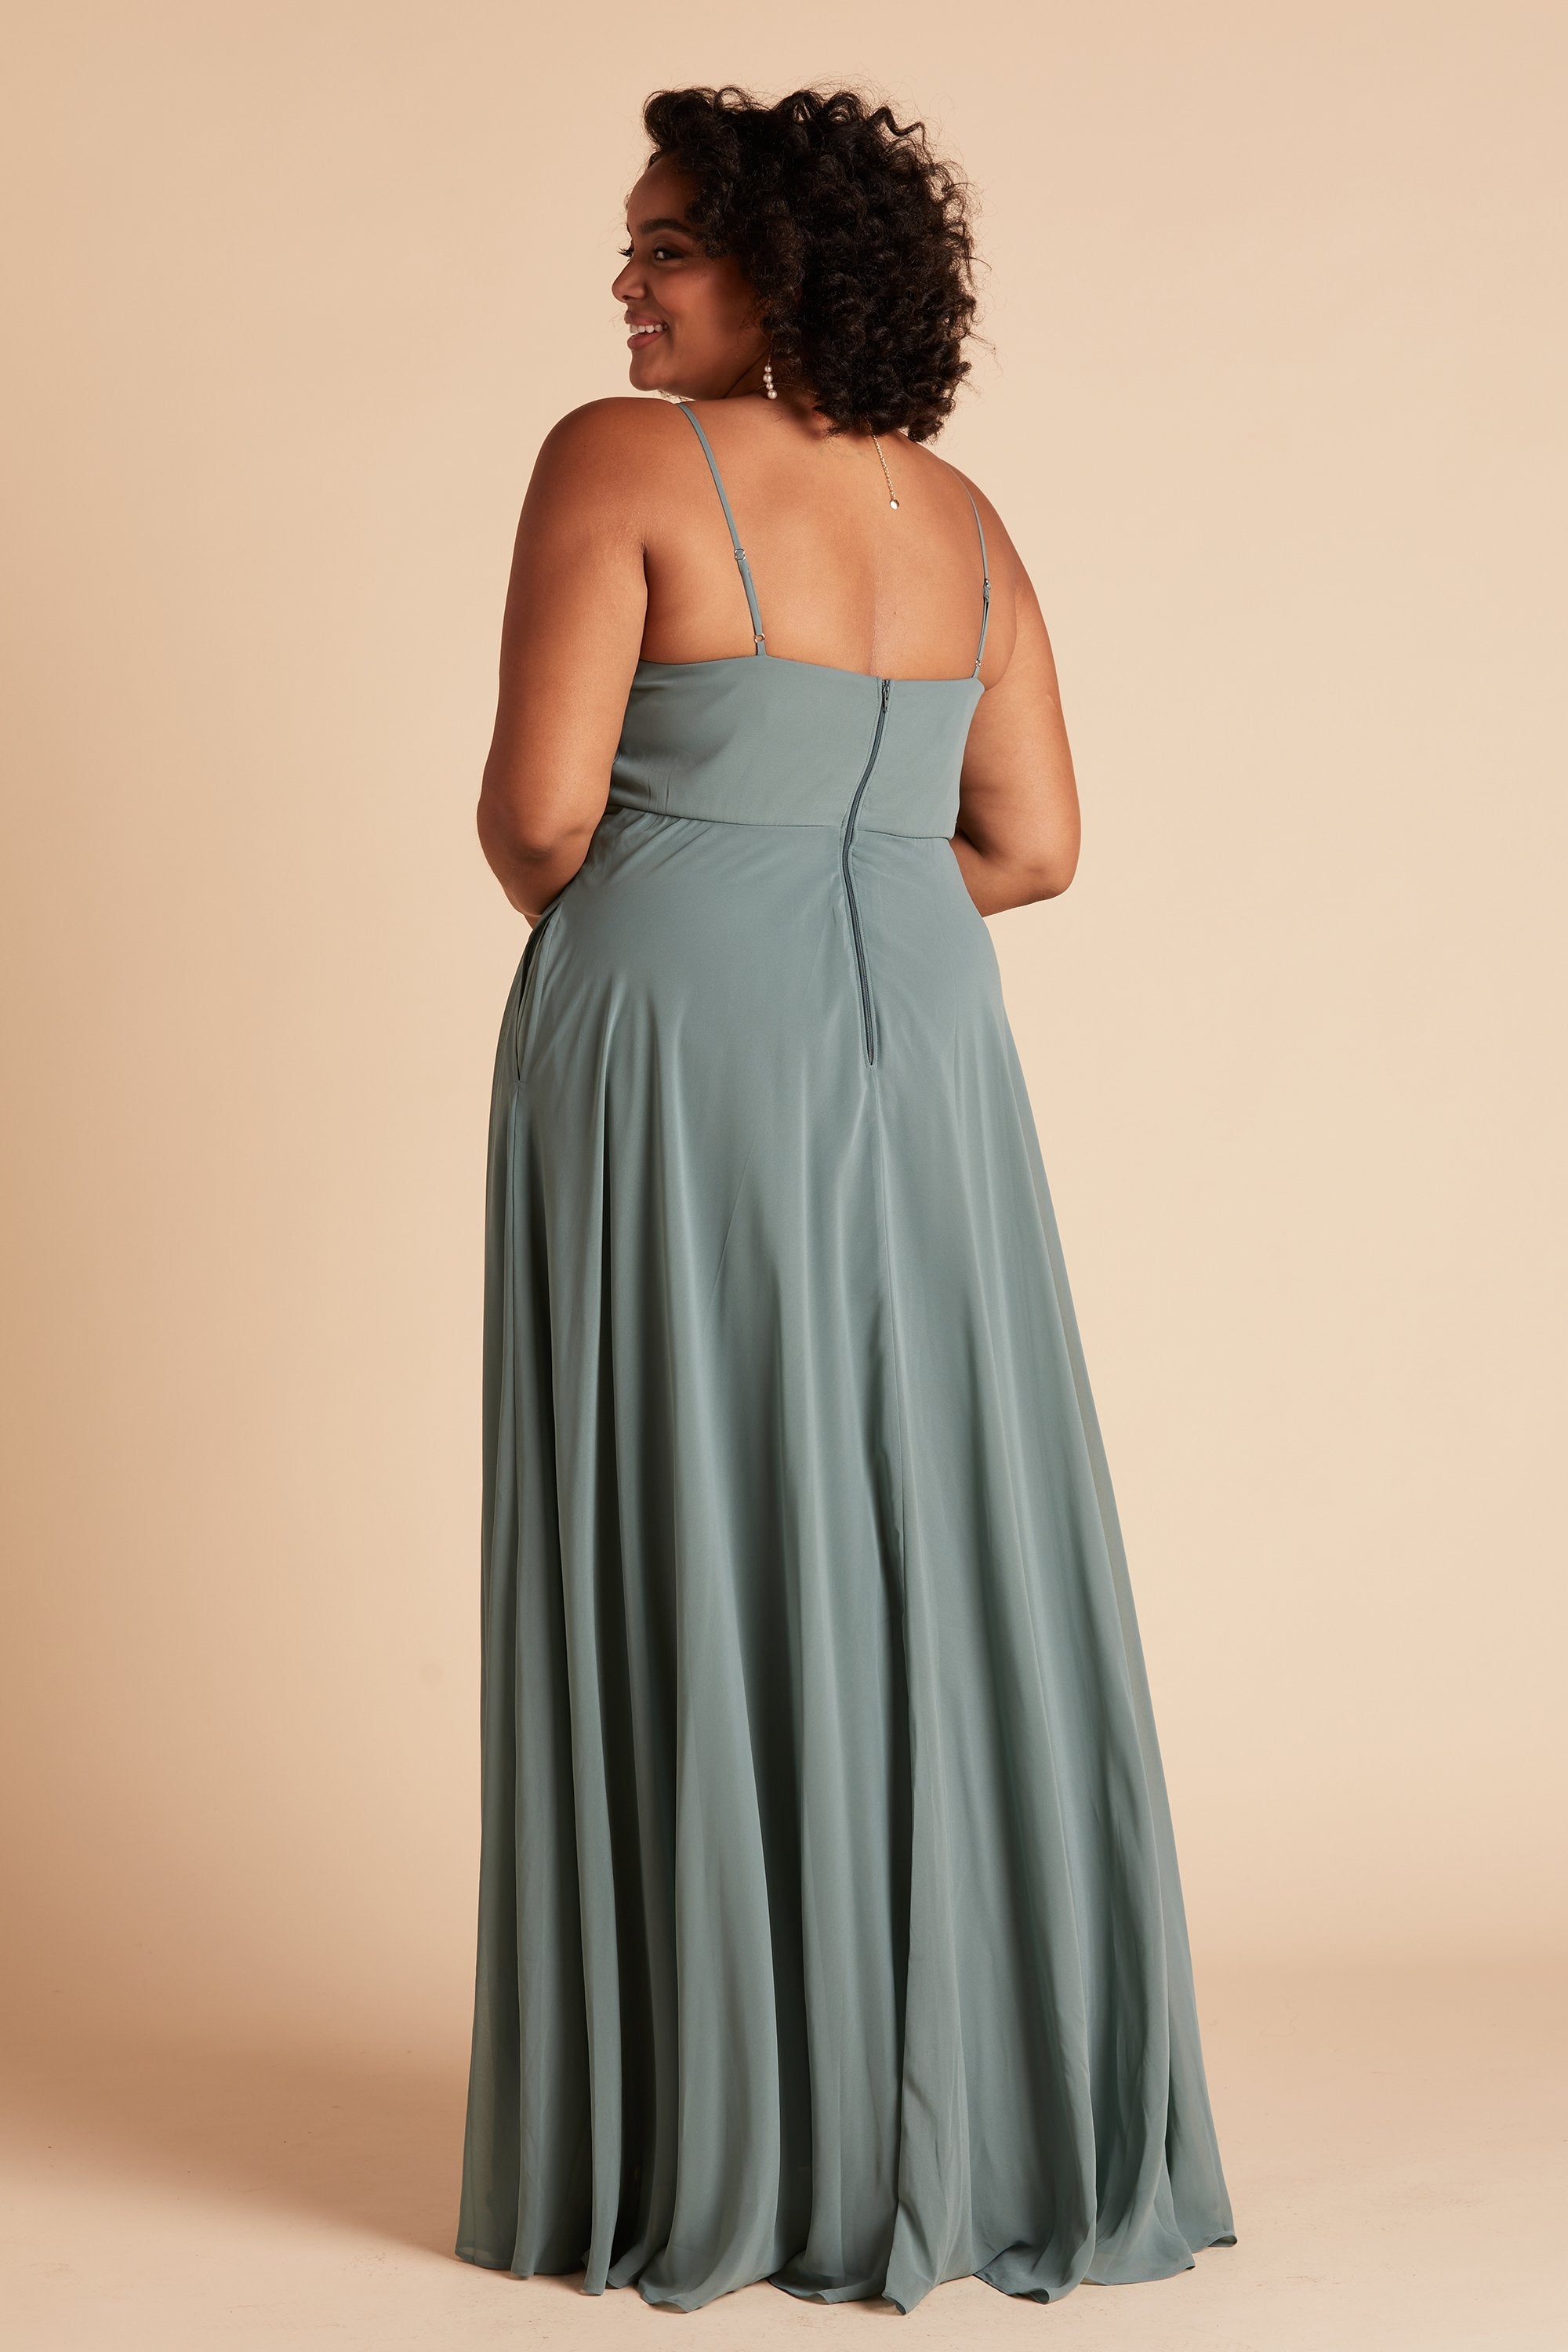 Back view of the Kaia Dress Curve in sea glass chiffon shows the hook and eye closure and hidden zipper in the center seam of the dress bodice and skirt.